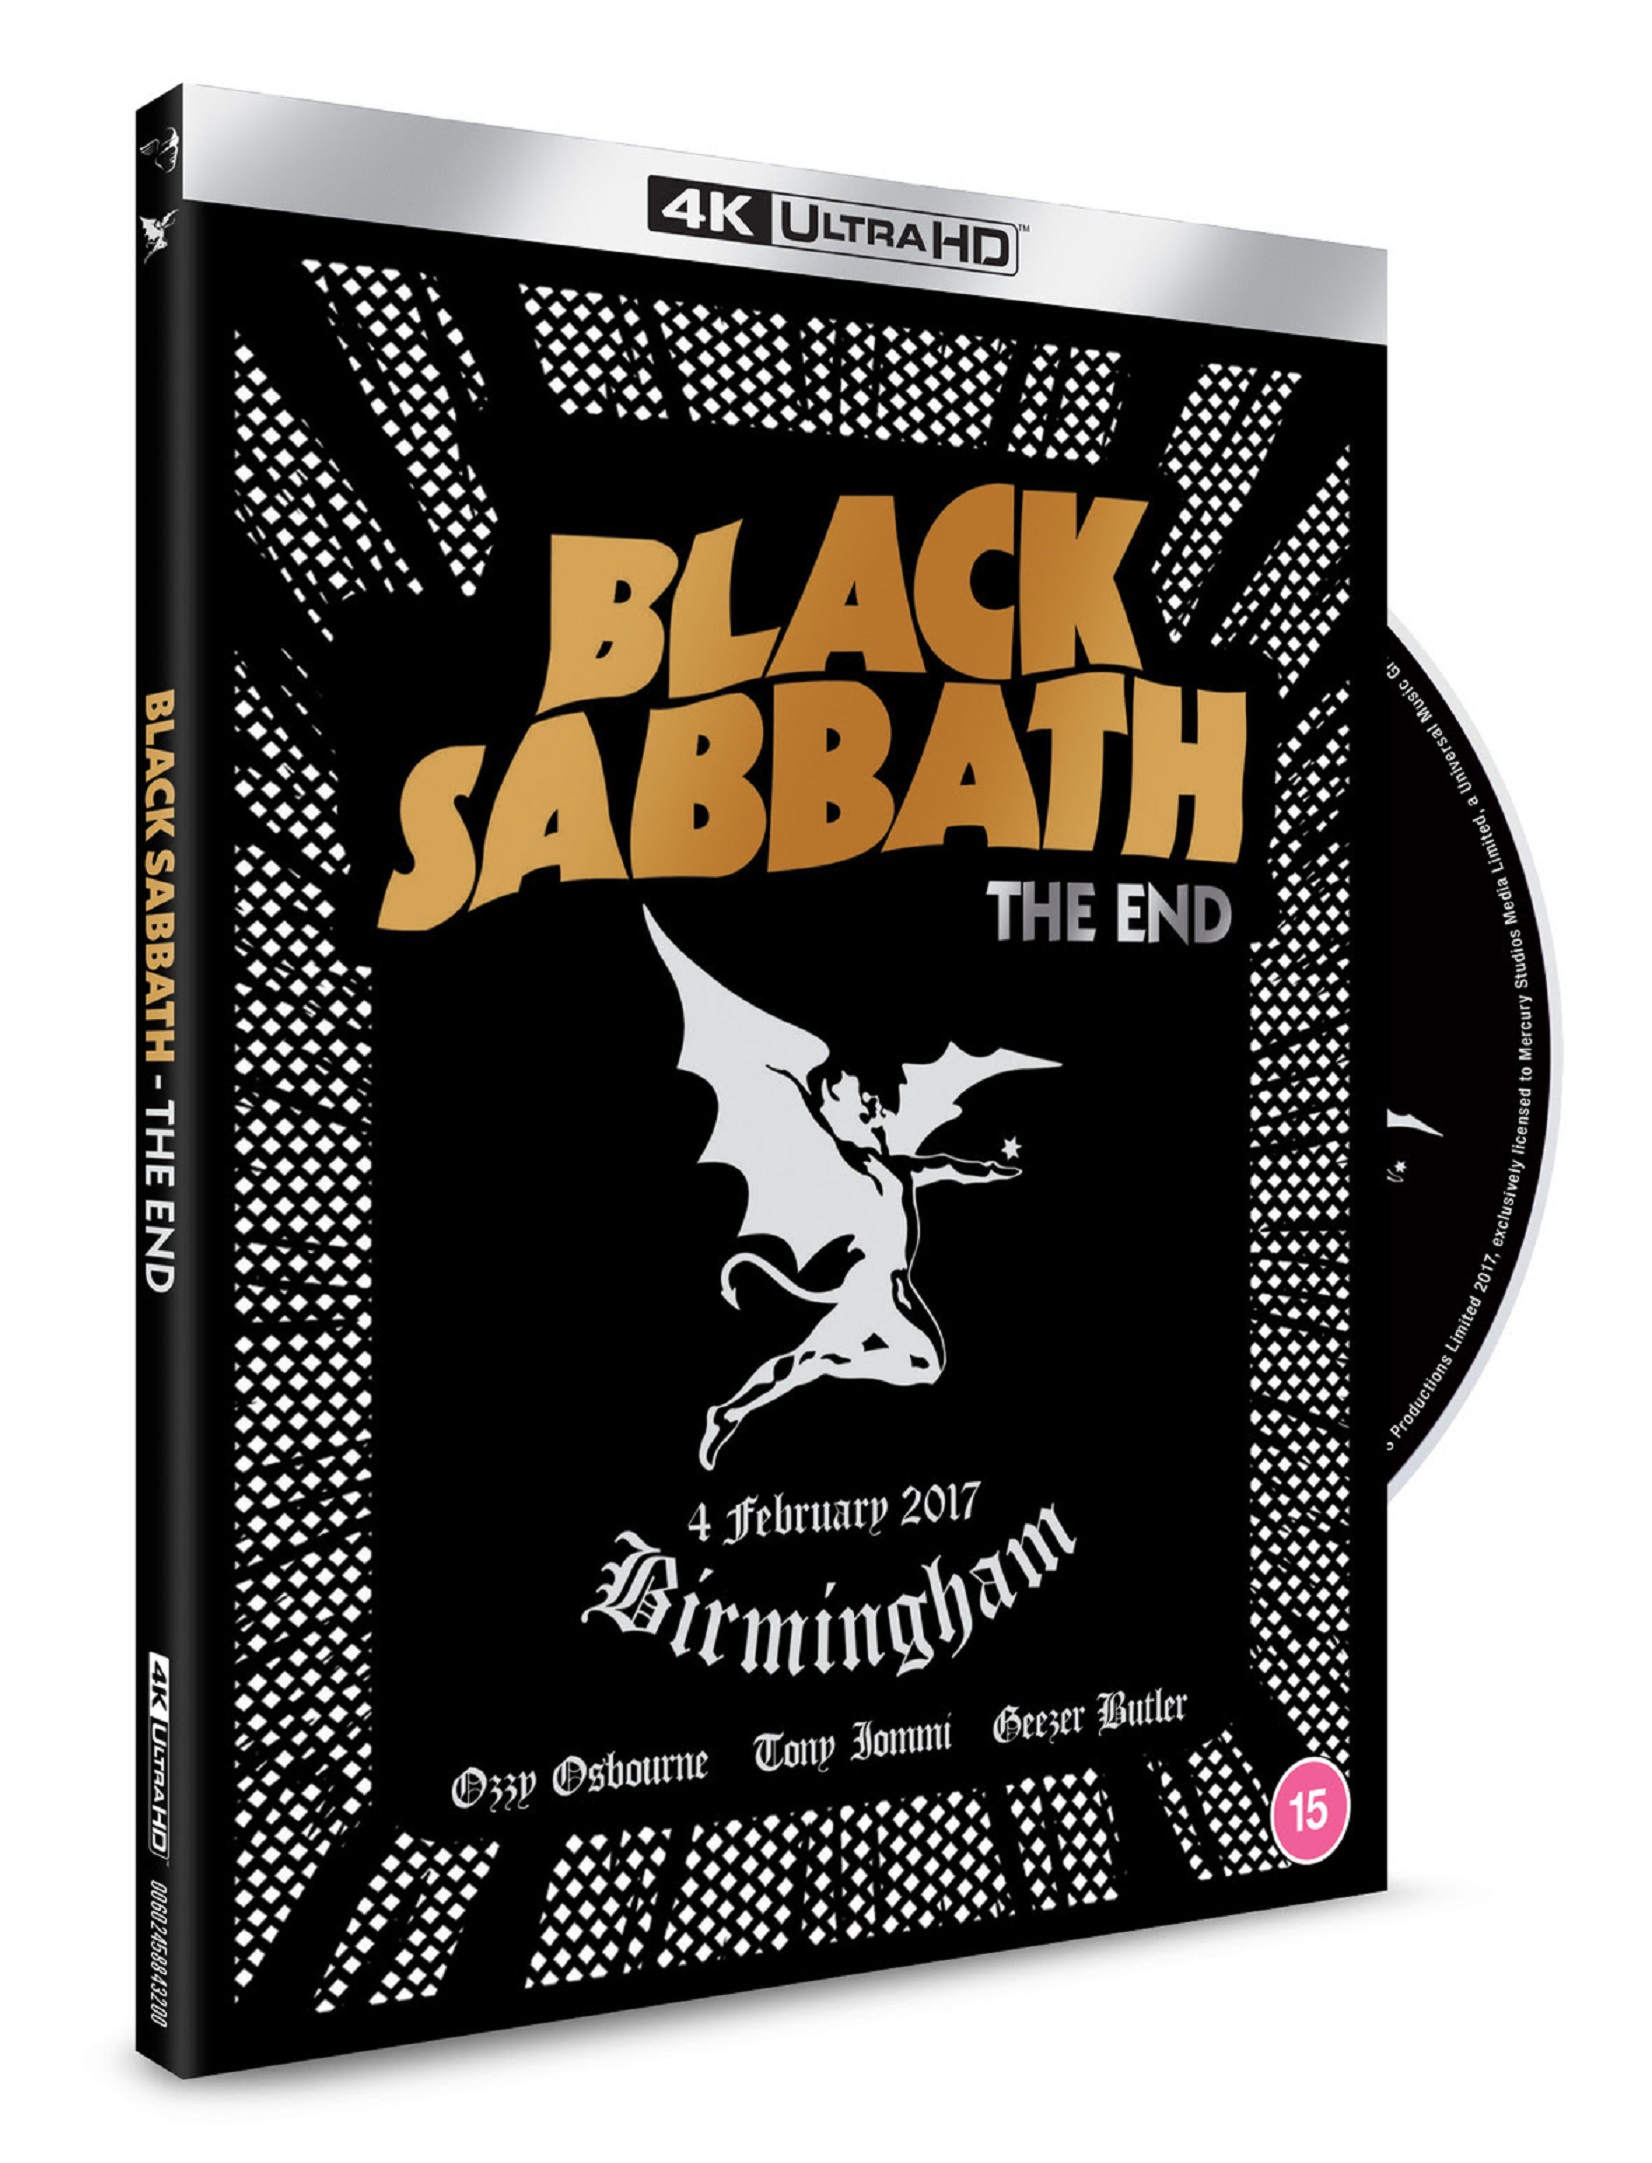 BLACK SABBATH THE END AND ERIC CLAPTON SLOWHAND AT 70-LIVE AT THE ROYAL ALBERT HALL ON 4K UHD OUT SEPTEMBER 13